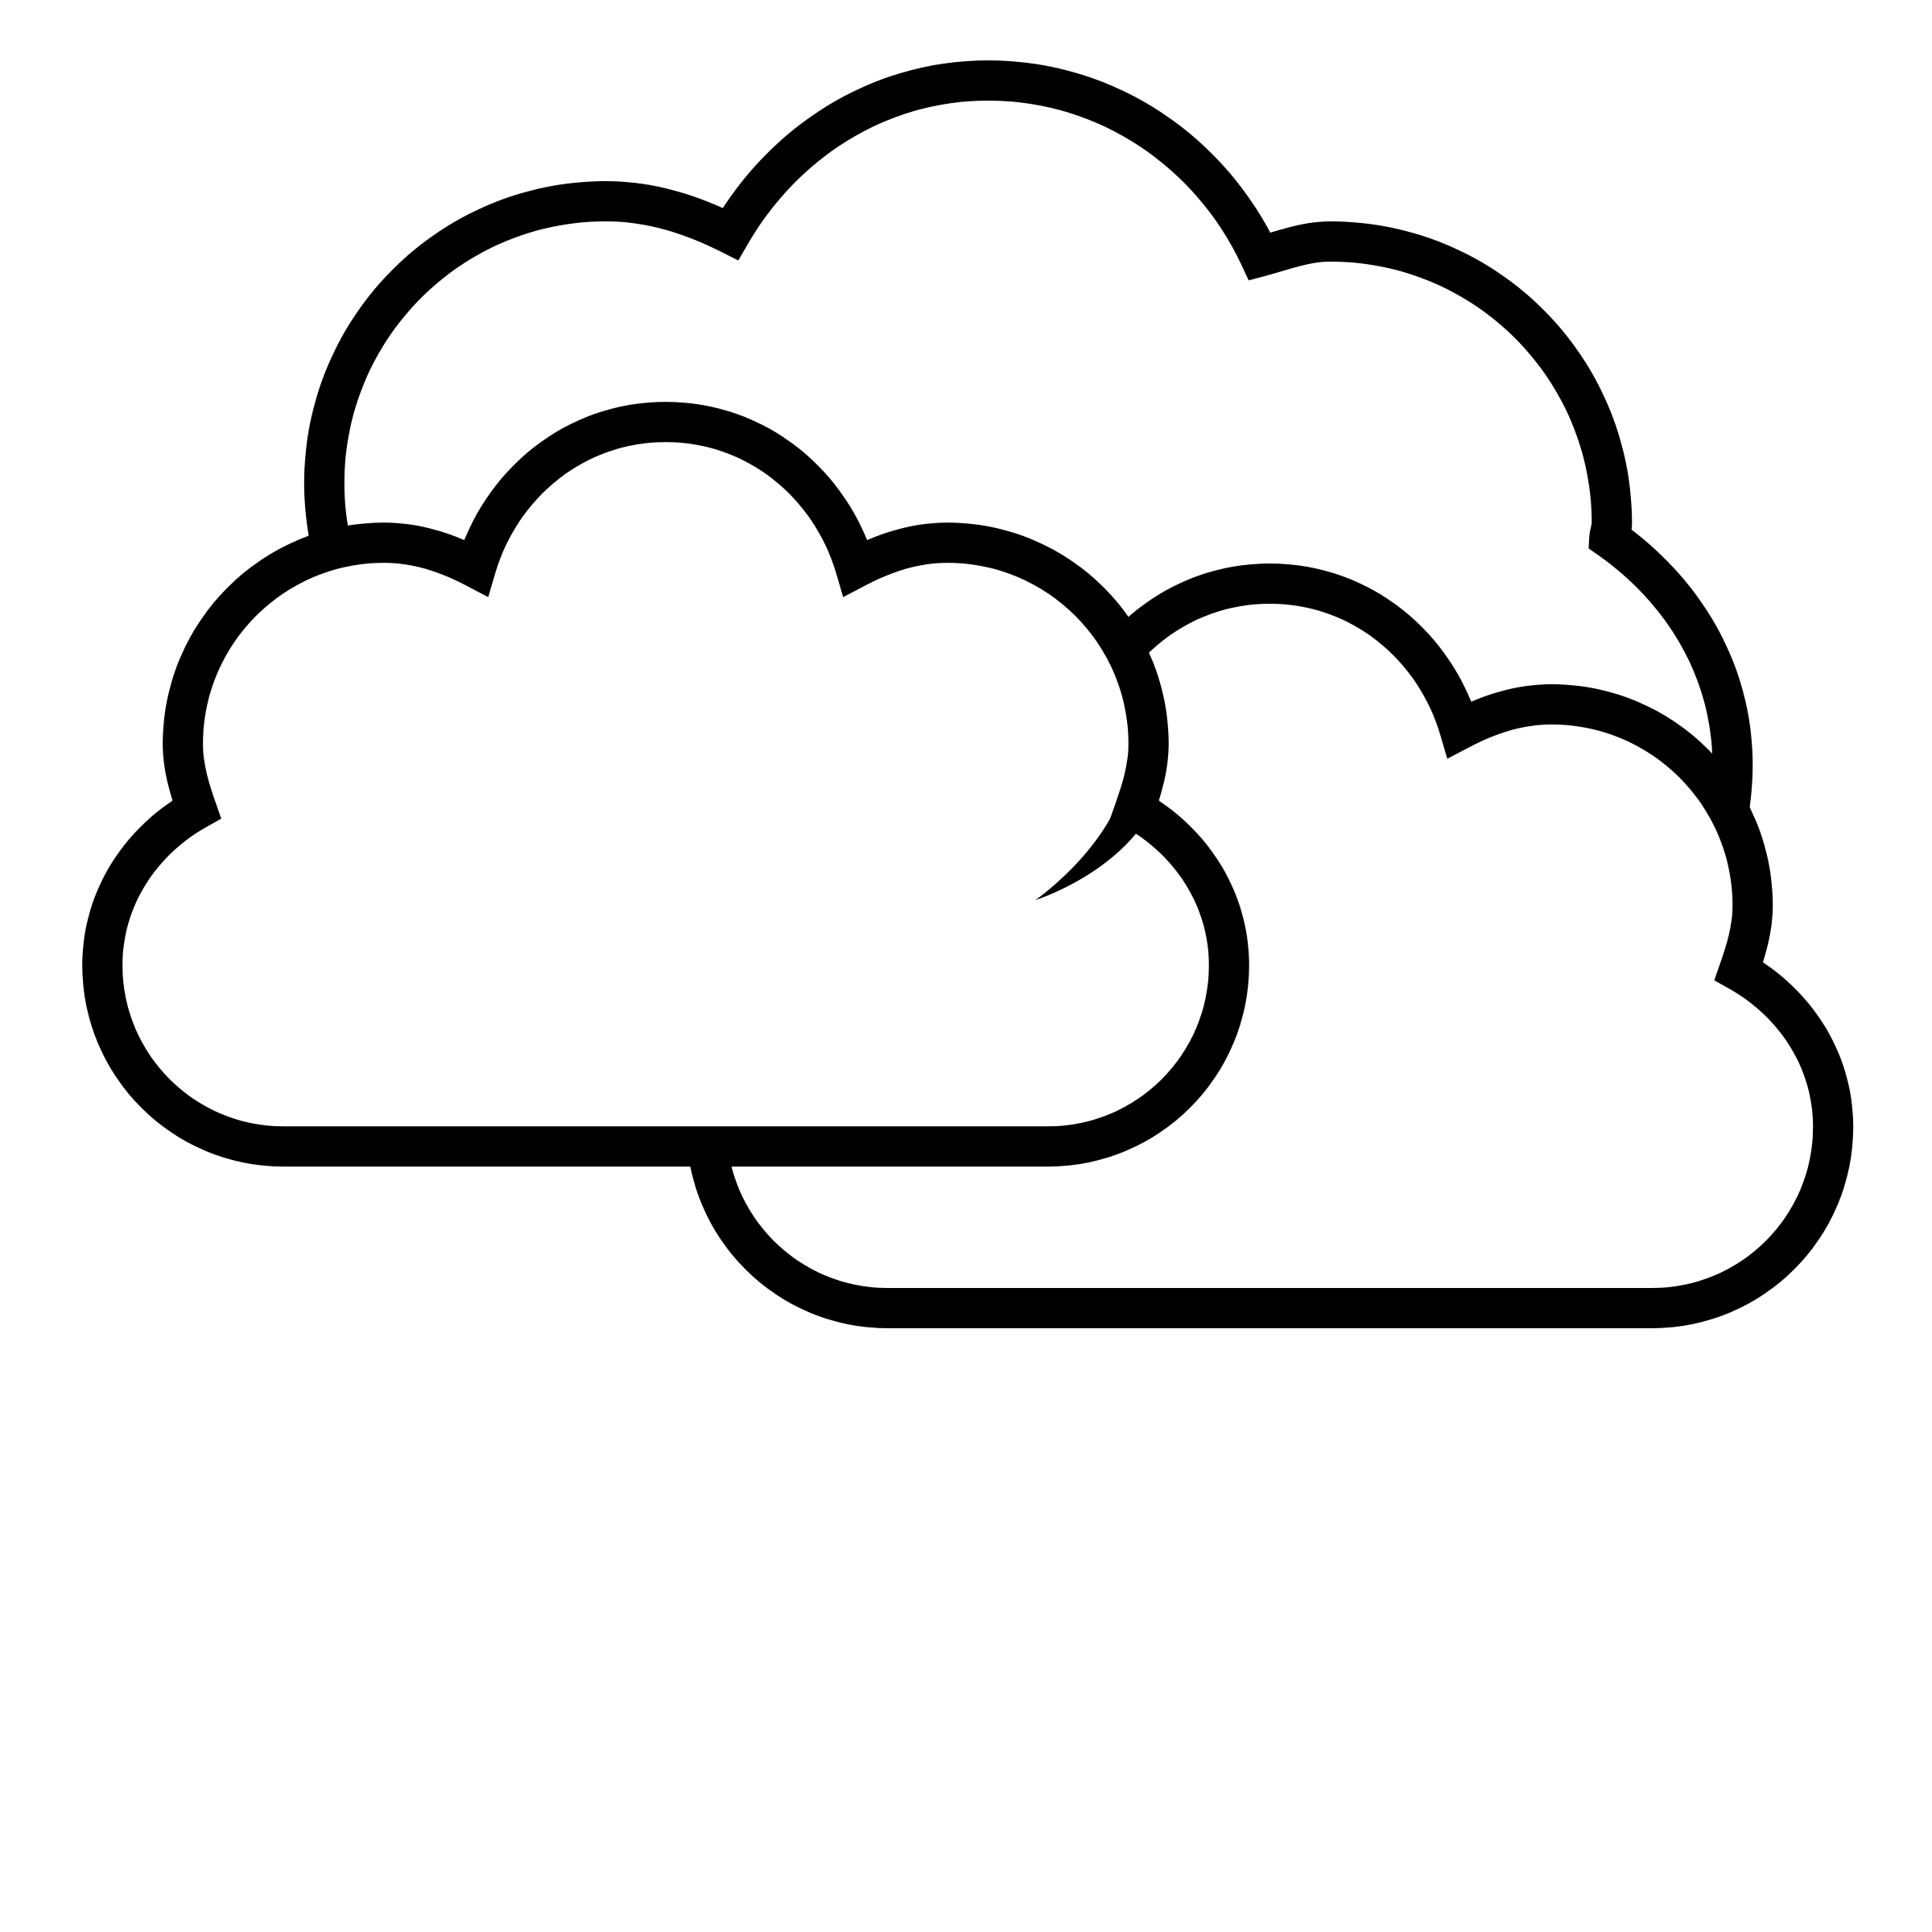 partly cloudy clipart black and white